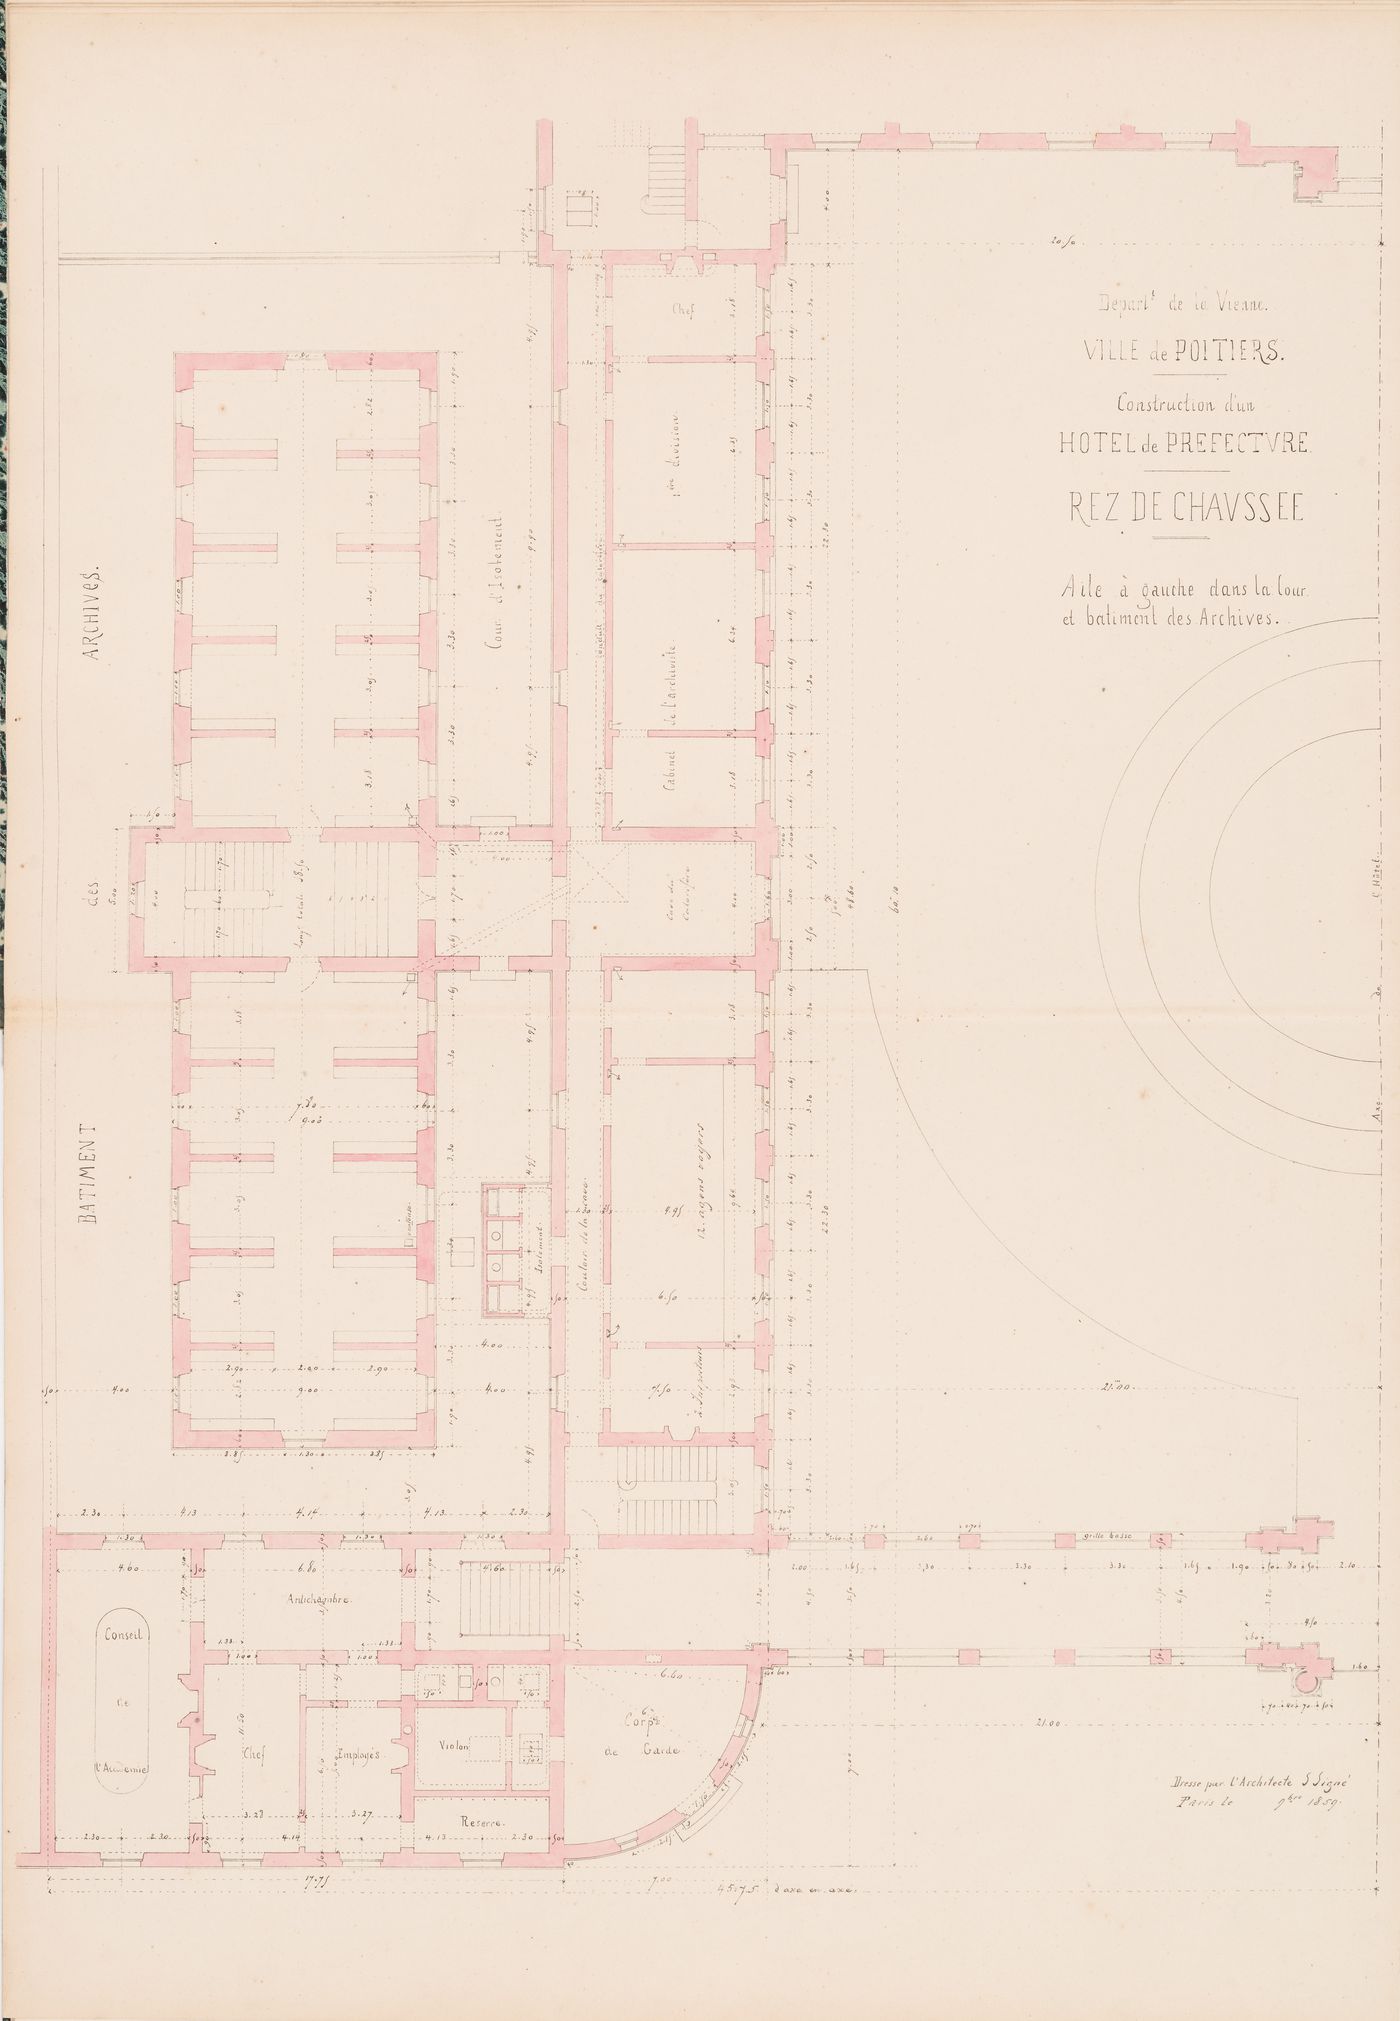 Project for a Hôtel de préfecture, Poitiers: Ground floor plan for the right wing, including the Archives building